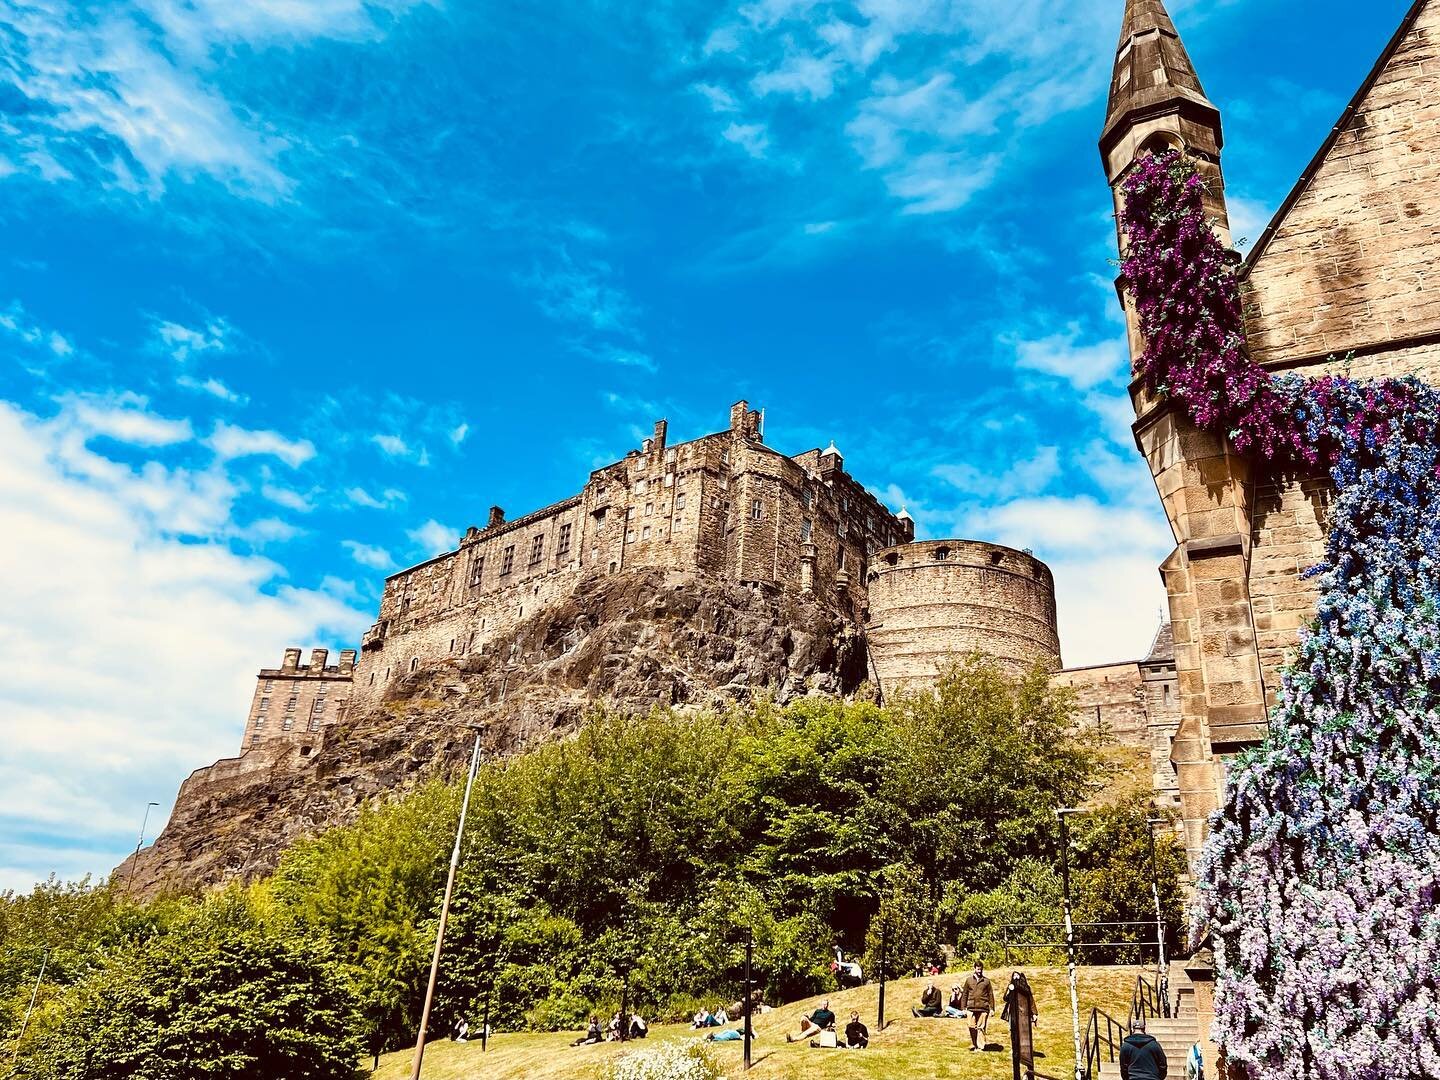 Adding mine to the endless list of pictures of Edinburgh castle taken from this very spot in the Grassmarket here on Instagram. 

The floral decoration belongs to Cold Town House - a microbrewery and pub/restaurant on the Grassmarket.